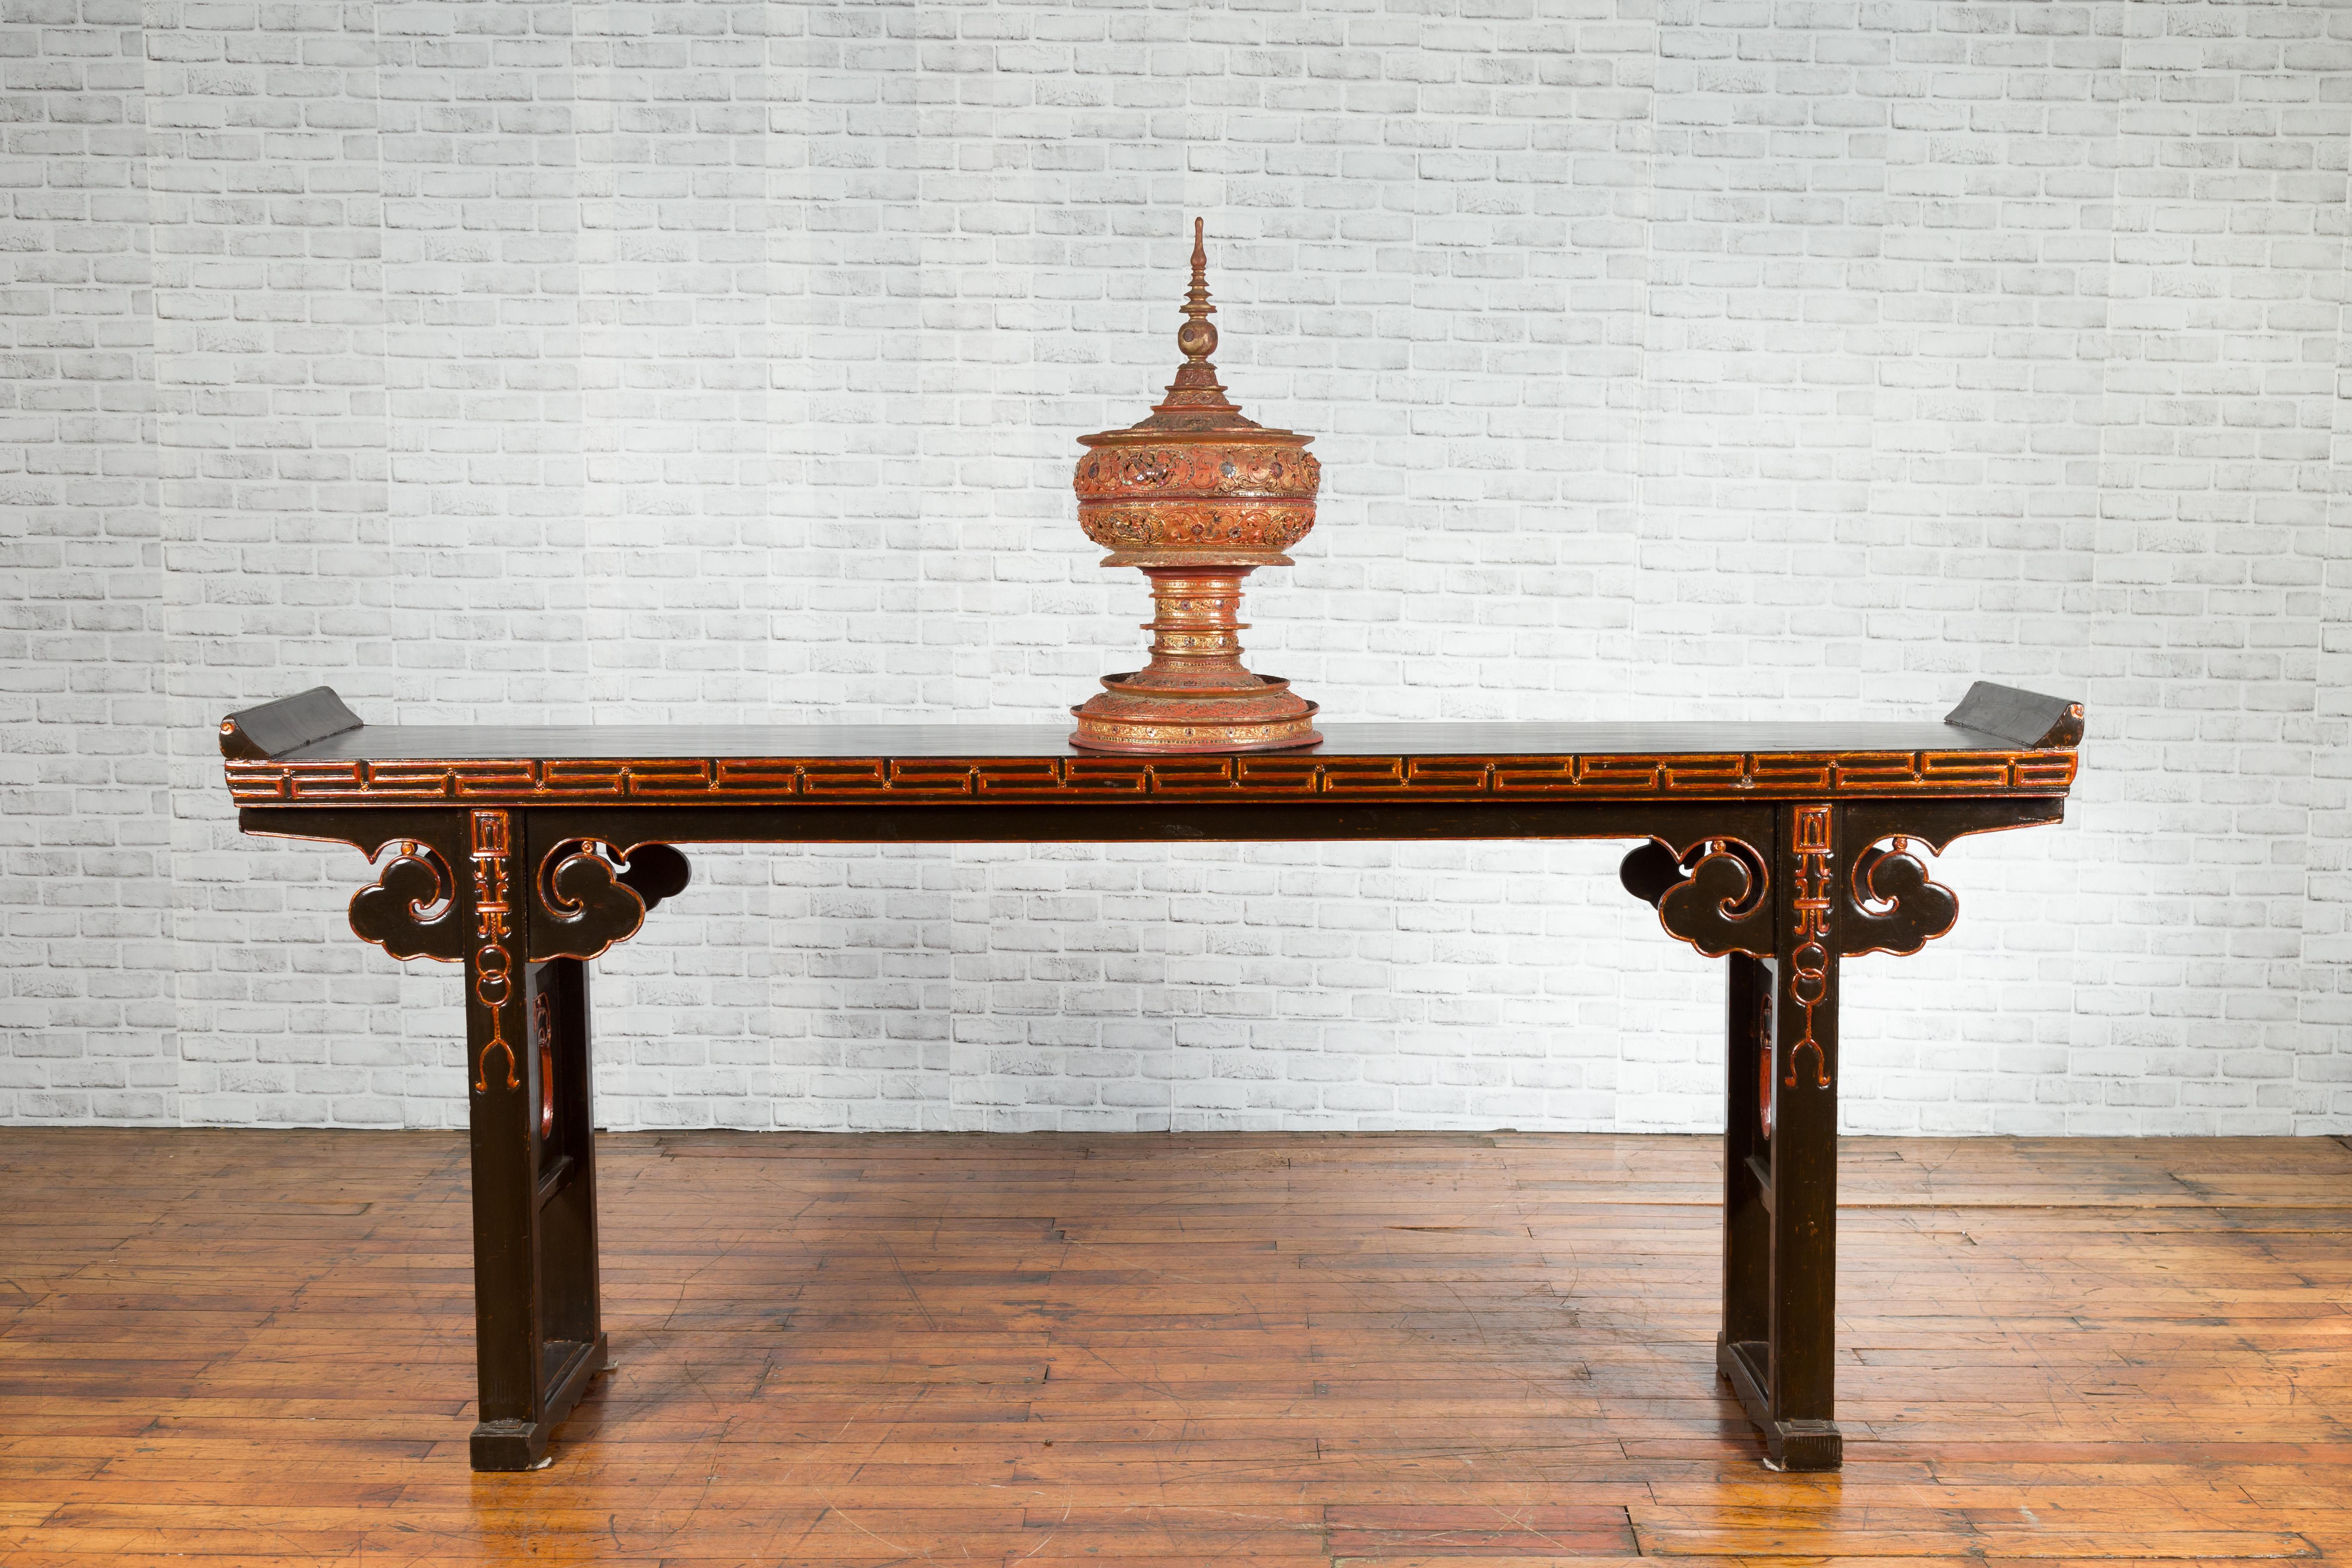 A Chinese Qing dynasty period Shandong long black lacquered altar console table from the late 19th century, with gold rubbed details and everted flanges. Created in Northeastern China during the Qing Dynasty, this long elm console table made in the